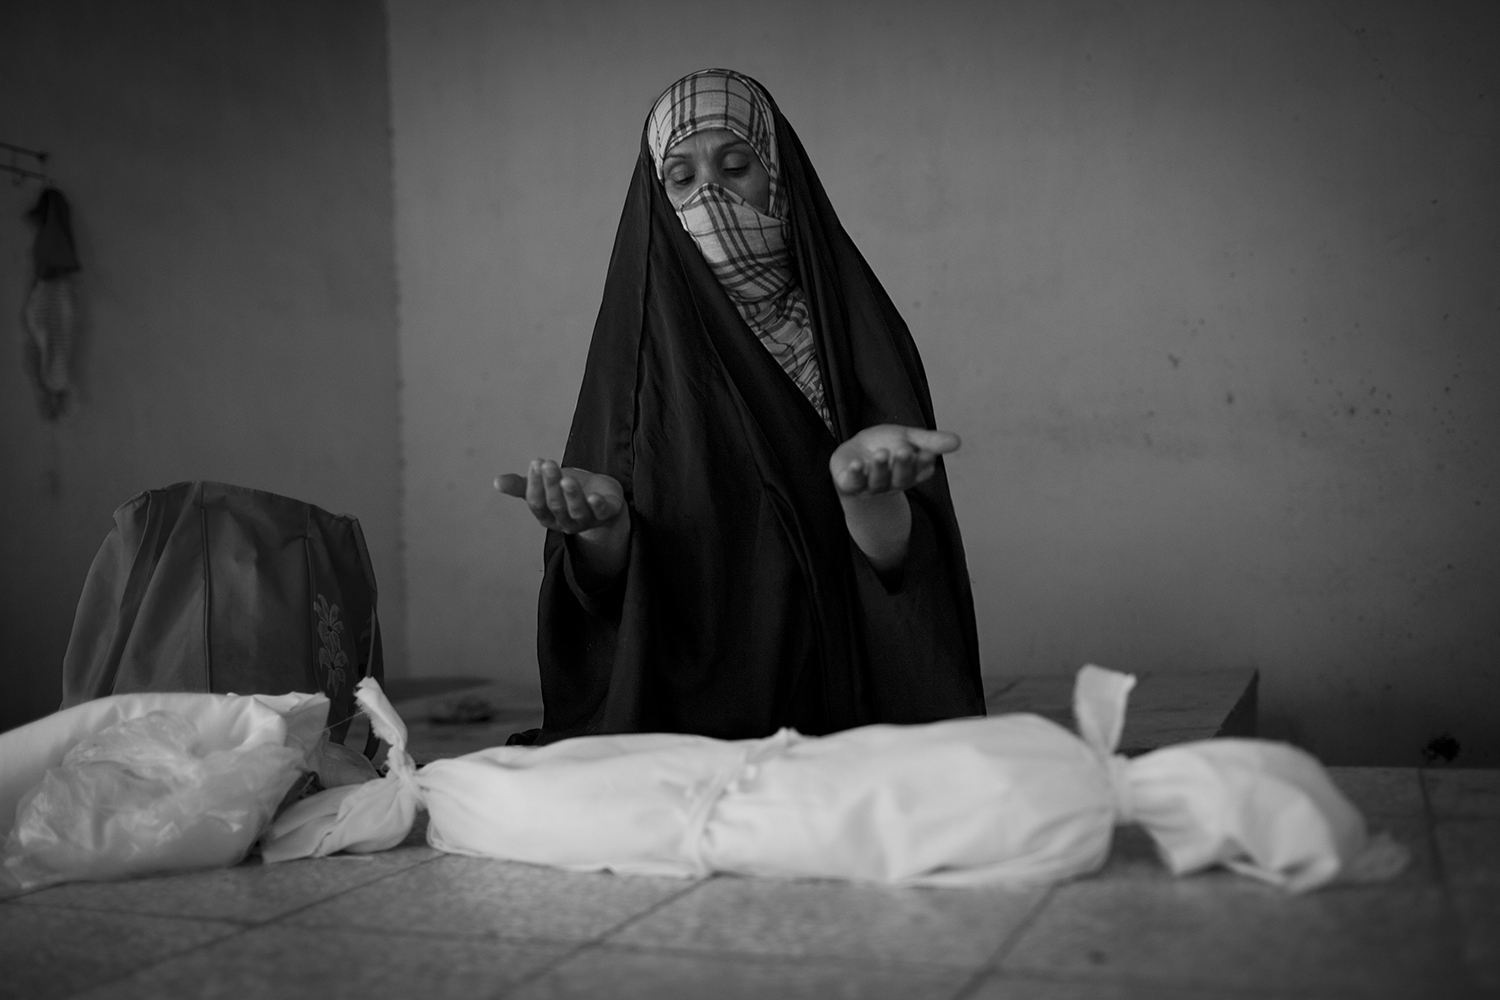 Oct. 22, 2012. Basra. An undertaker prays for a stillborn boy who is wrapped in linen cloth before his burial at the children's cemetery.